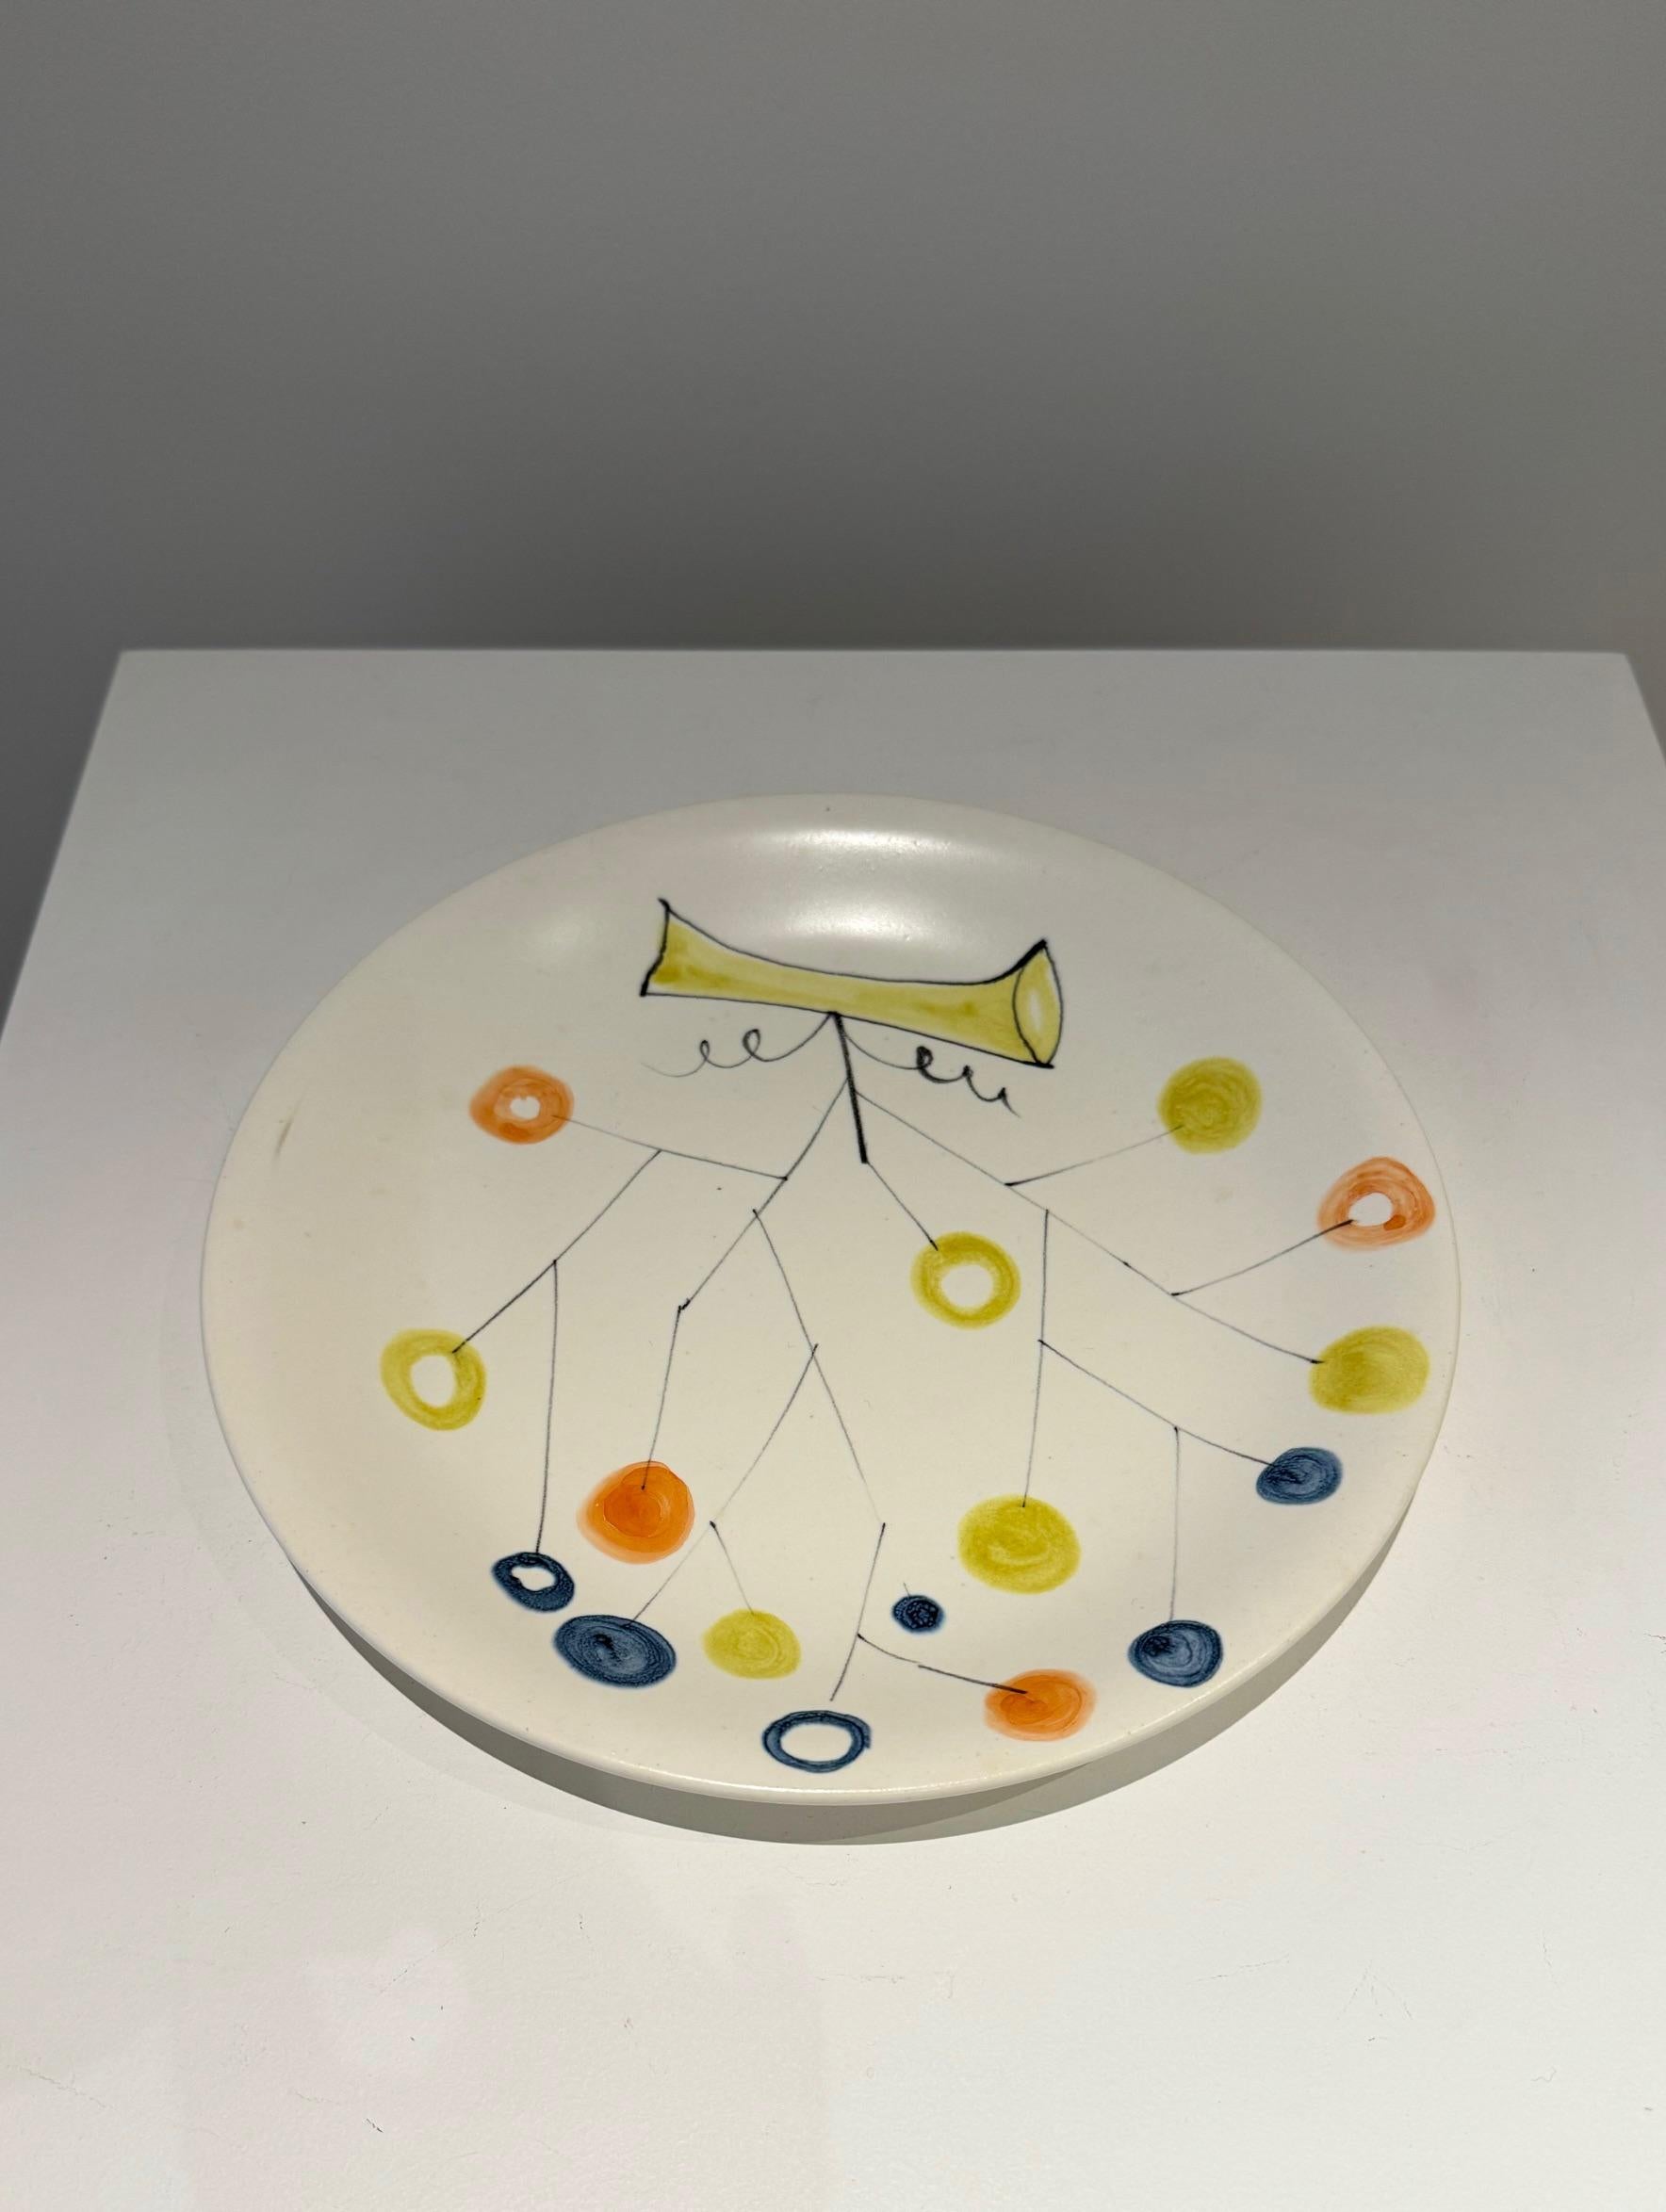 Roger Capron (1922-2006)
Roger Capron studied at Art appliqués of Paris from 1938 to 1943 before teaching drawing in the same establishment from 1945. In 1946, he settled in Vallauris where he created a ceramic workshop.

Unusual plate with stylized